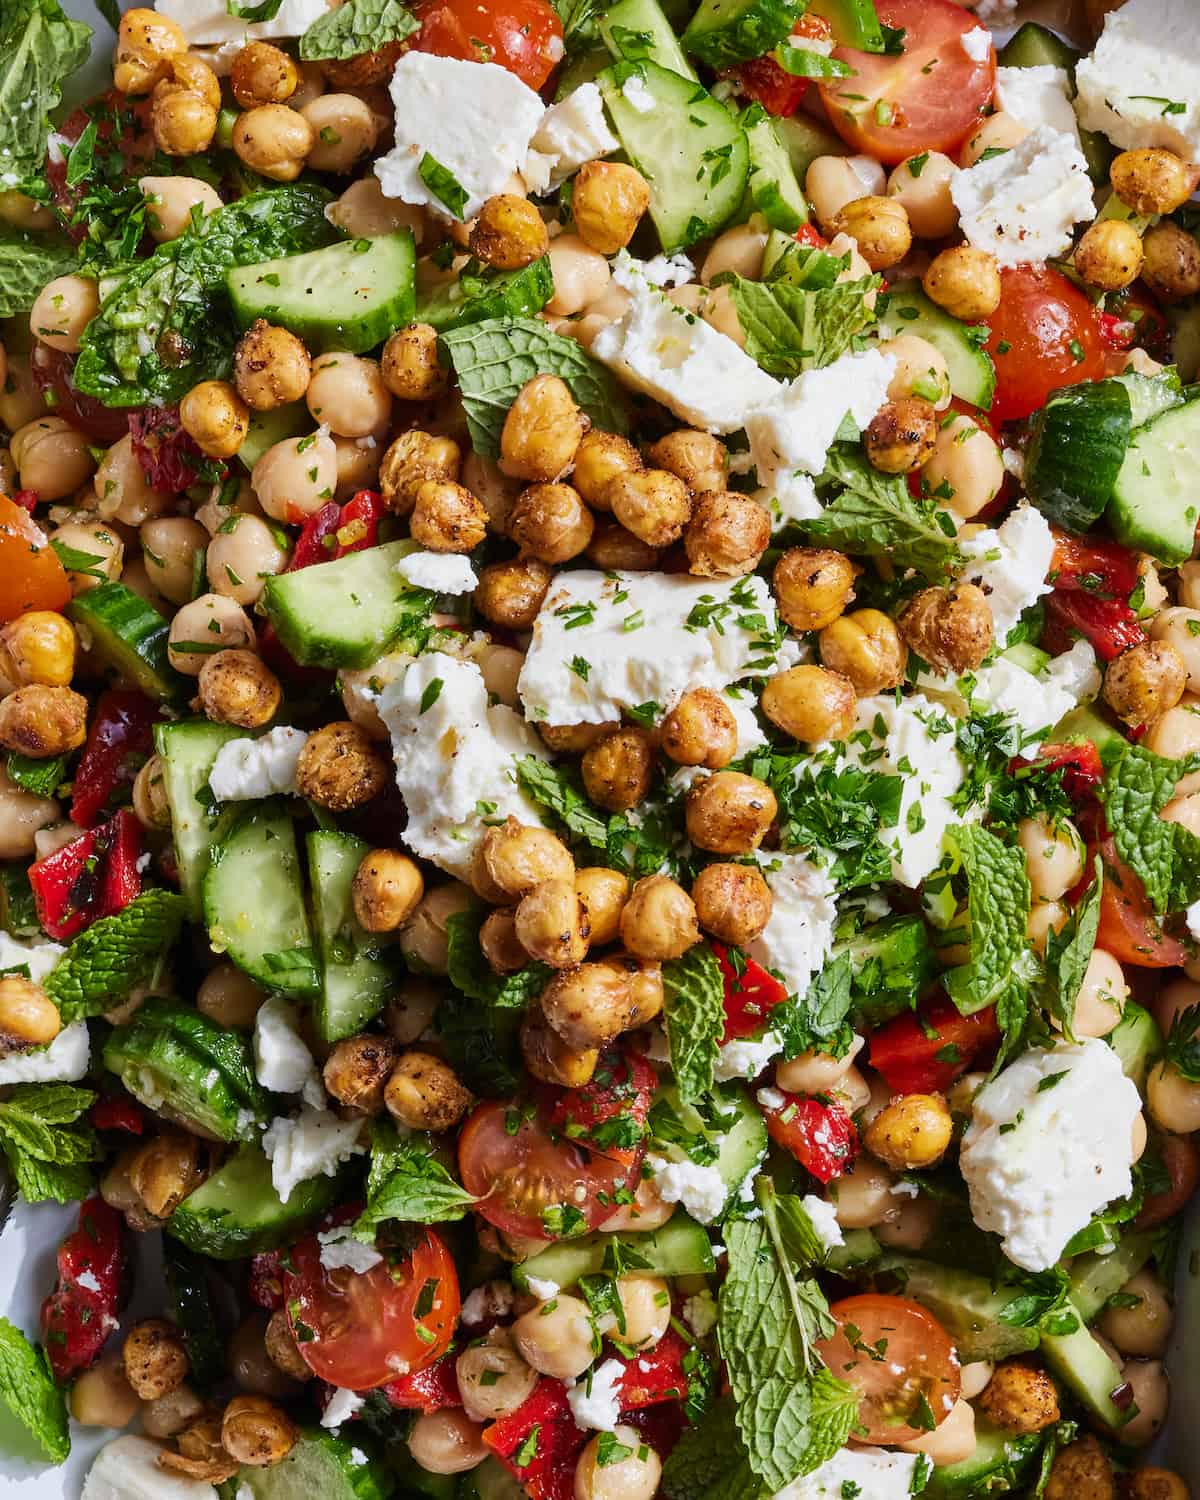 A close-up shot of chickpea chopped salad, with crispy chickpeas, mint leaves, feta, cucumbers, tomatoes and red bell peppers.